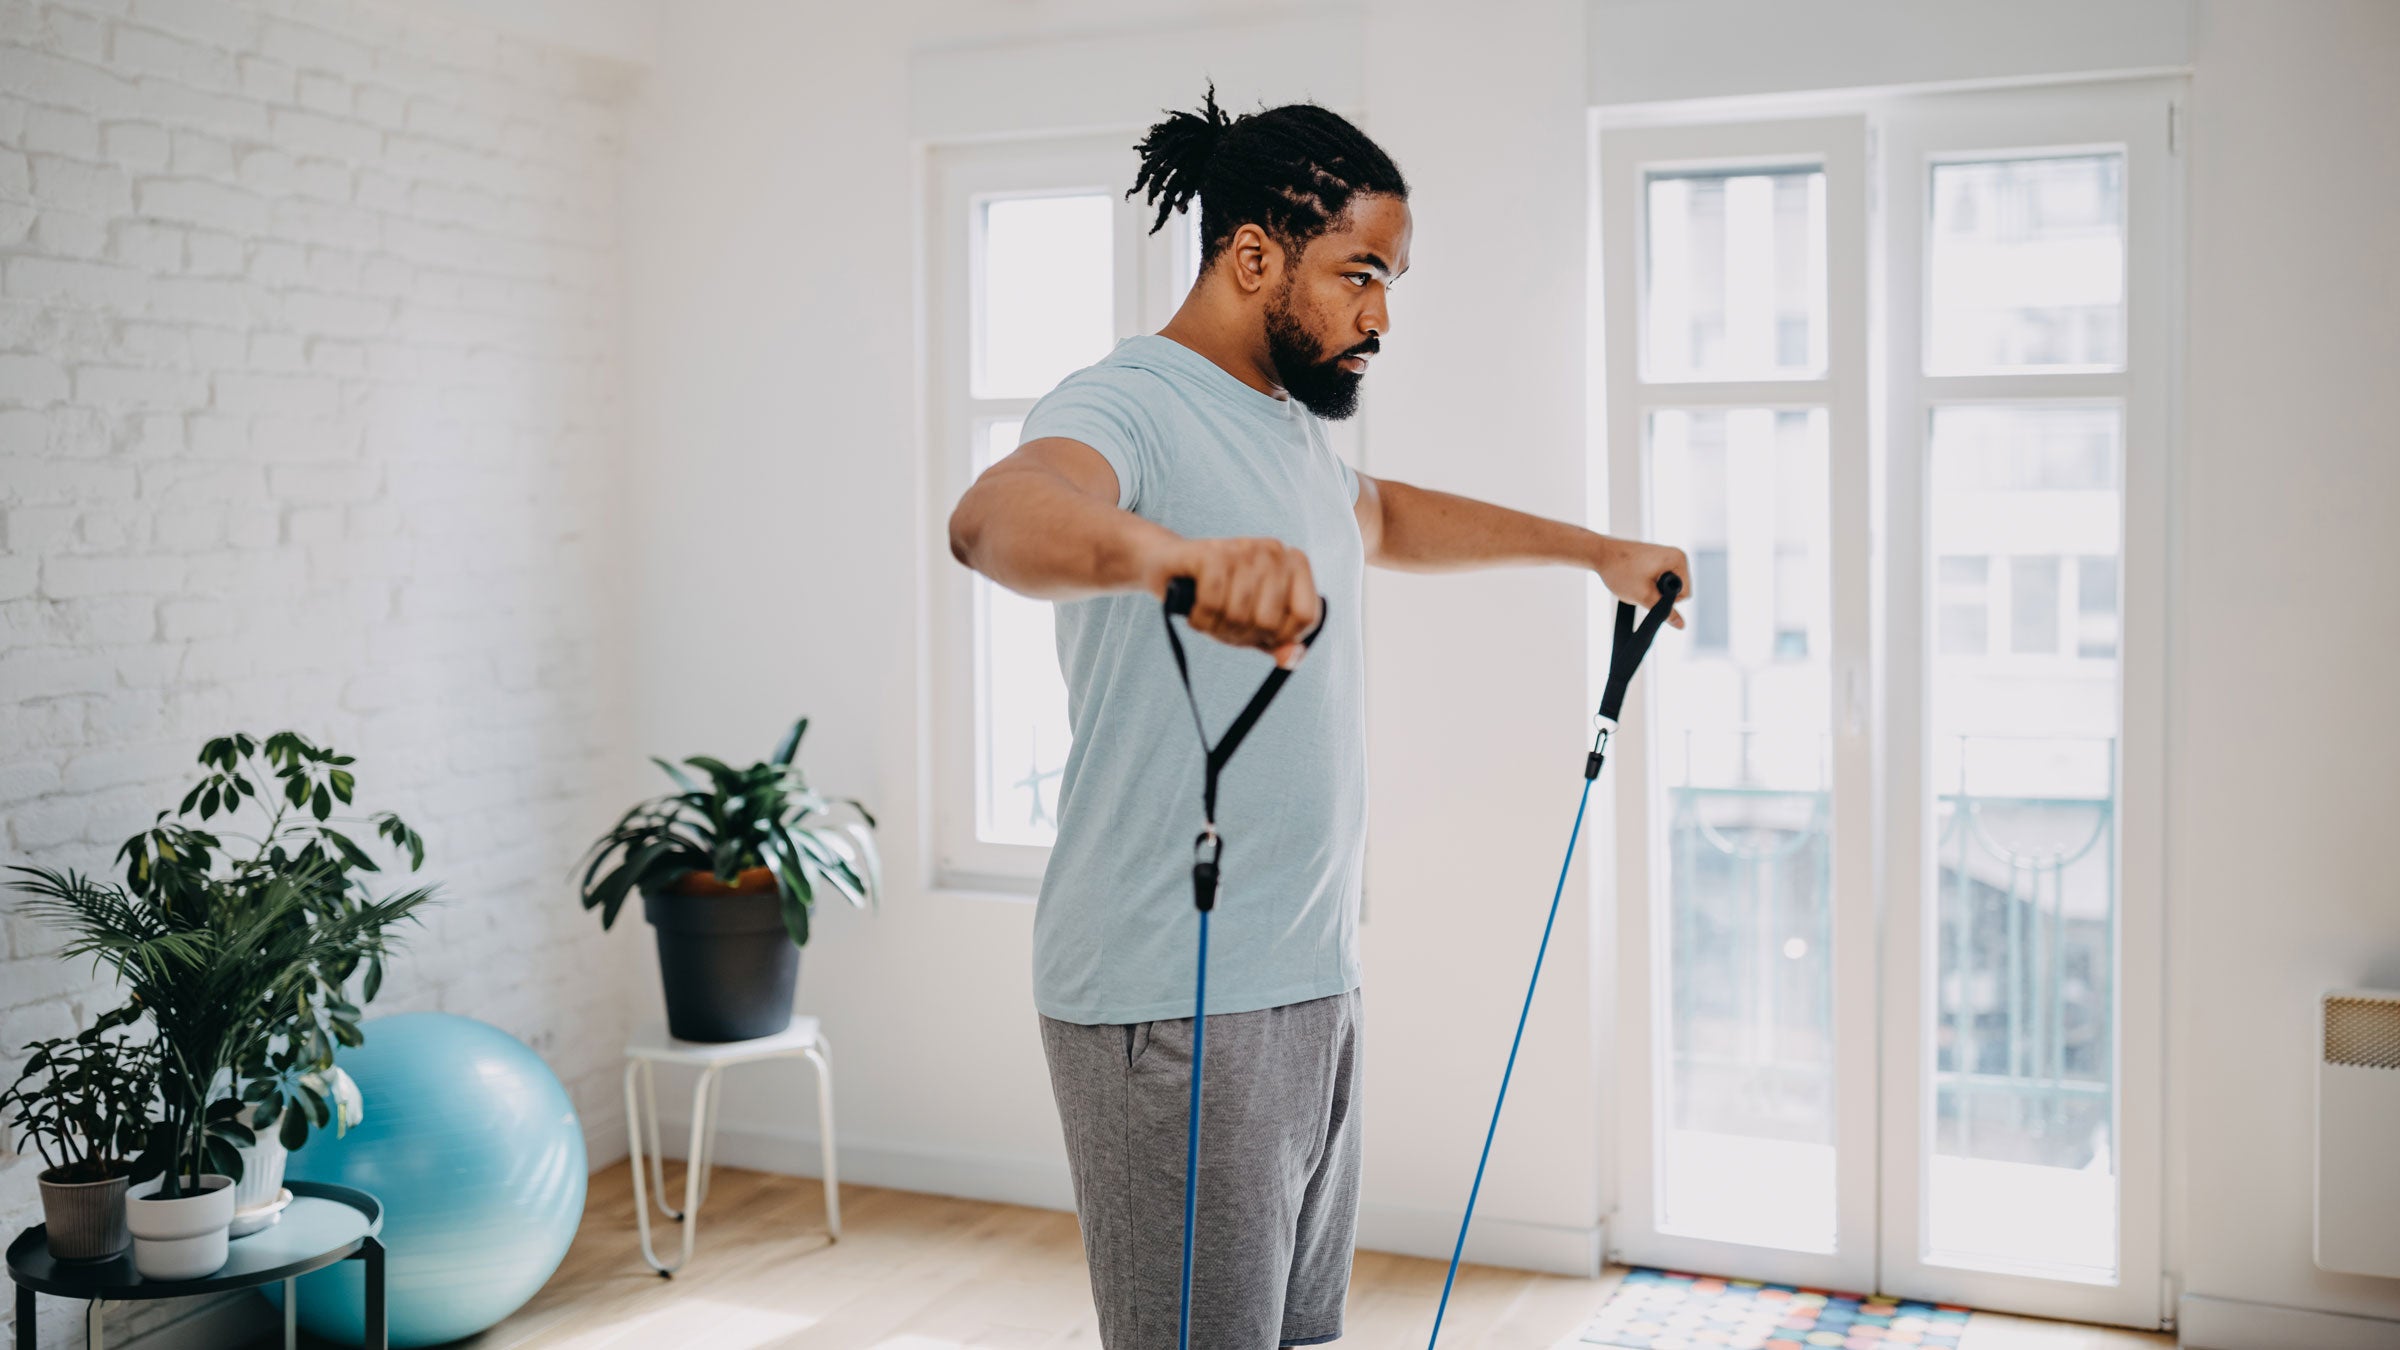 Best Resistance Bands To Buy For At-Home Workouts